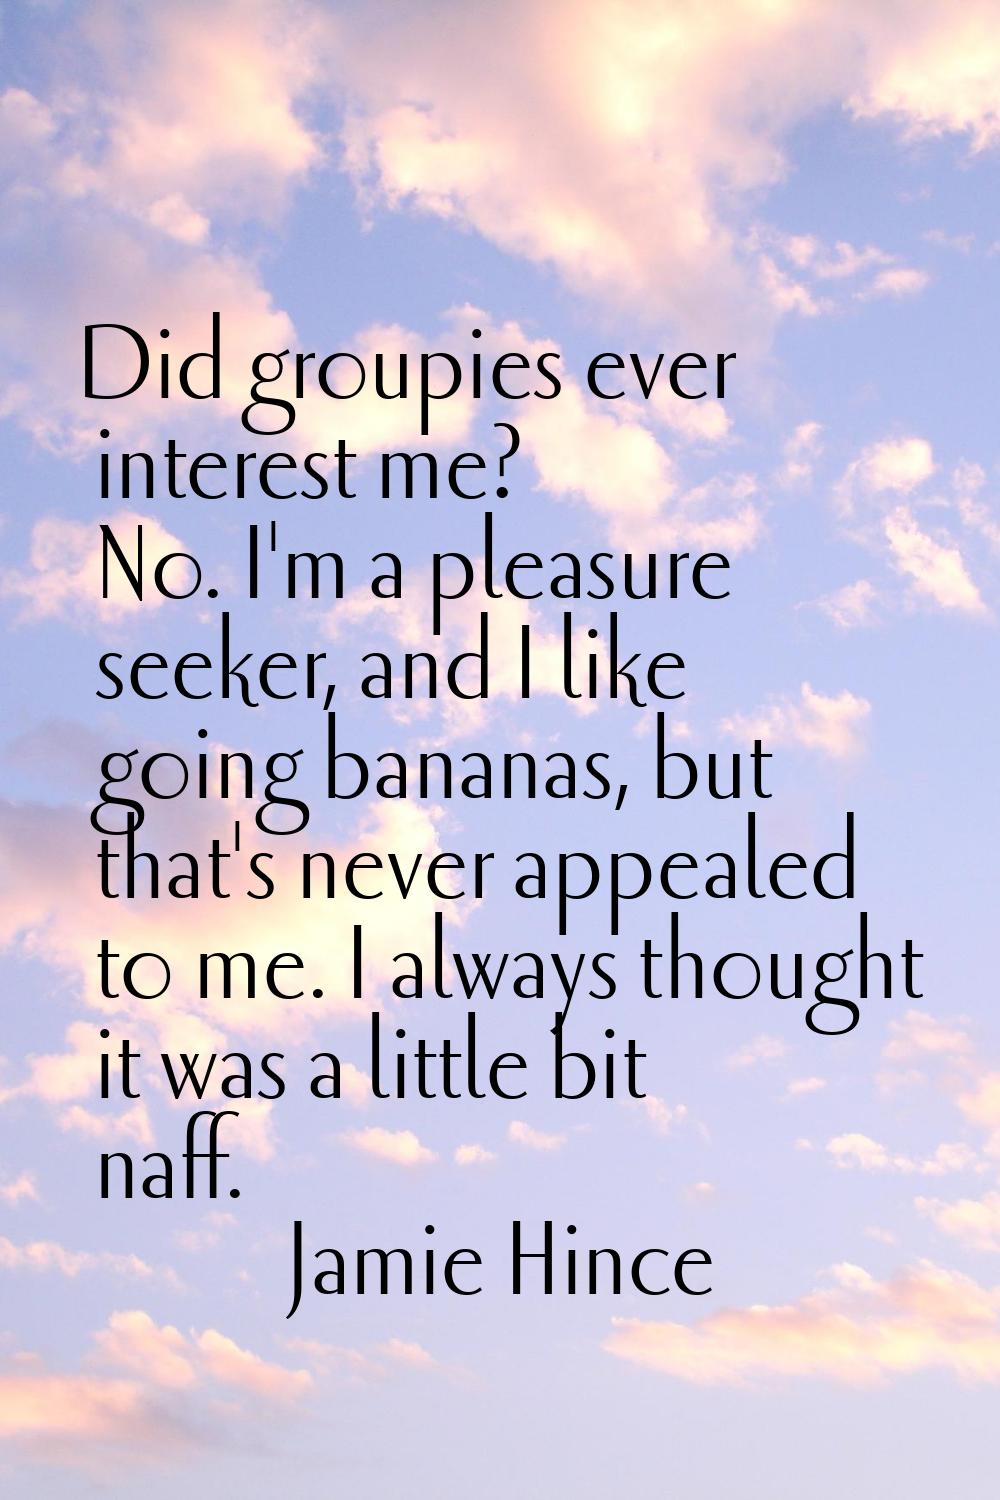 Did groupies ever interest me? No. I'm a pleasure seeker, and I like going bananas, but that's neve